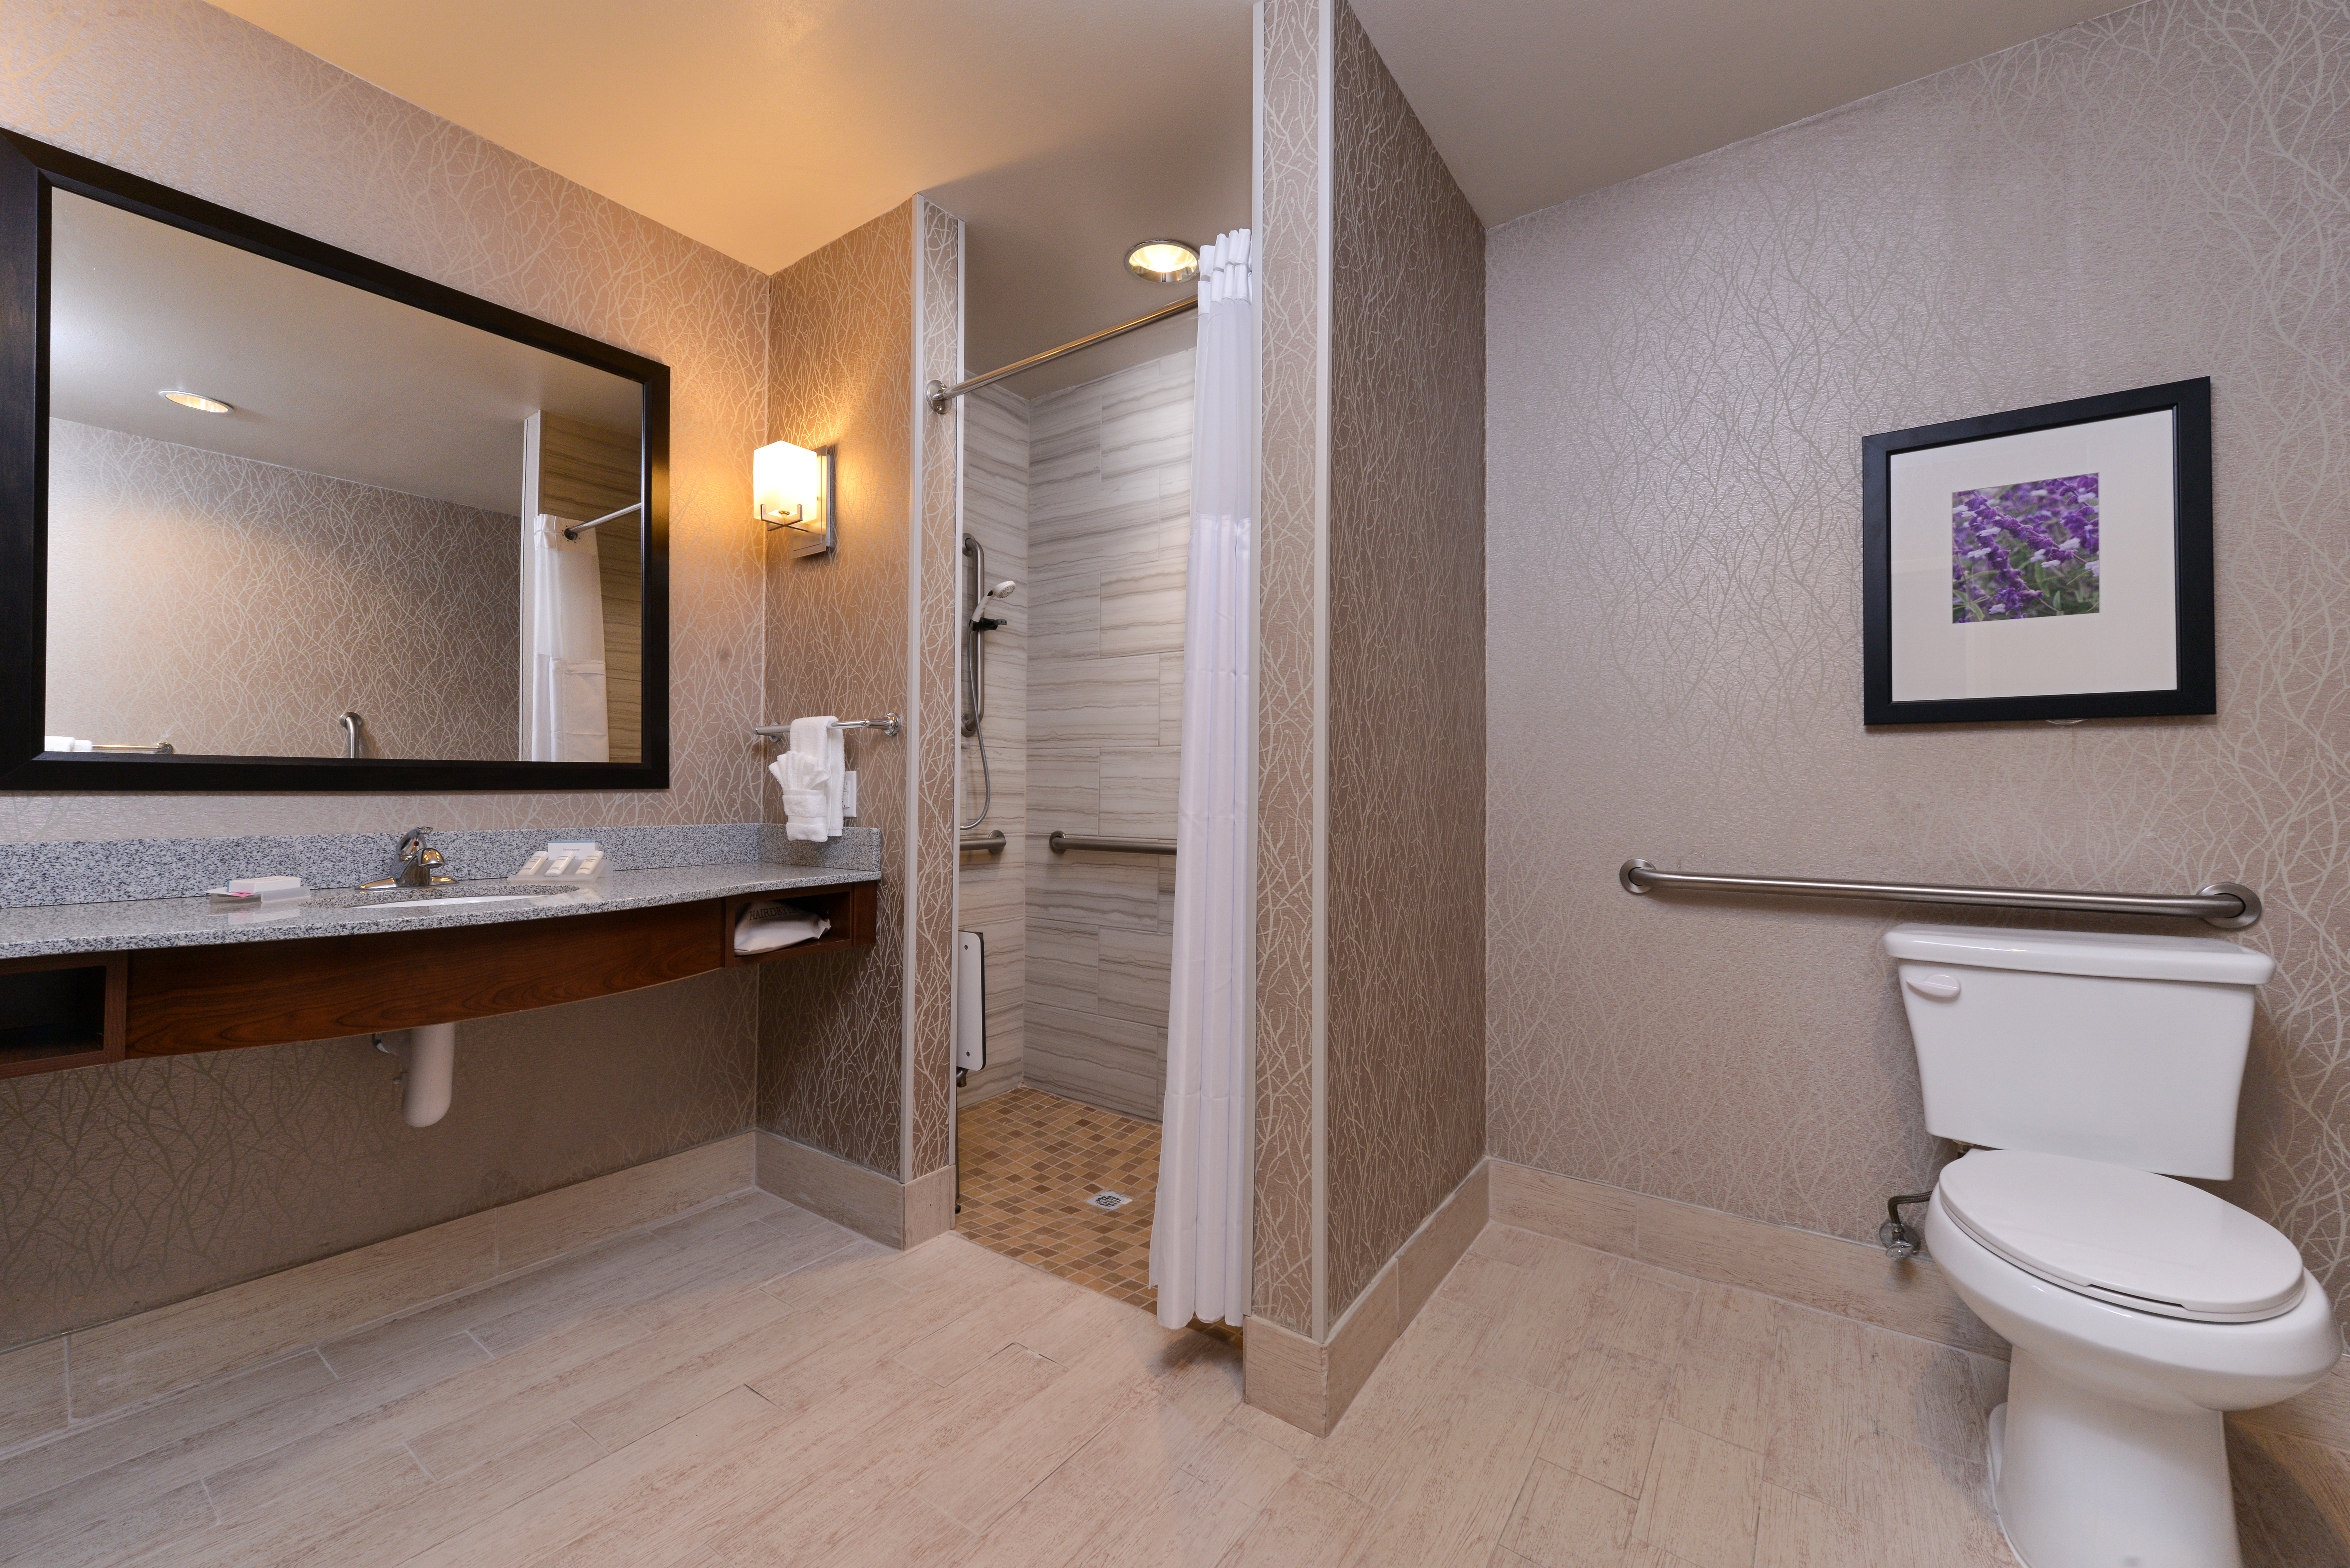 Vanity Mirror, Sink, Towels, Toiletries, Roll-in Shower with Bench, Grab Bars, Handheld Showerhead and Wall Art Above Toilet With Grab Bars in Accessible Bathroom